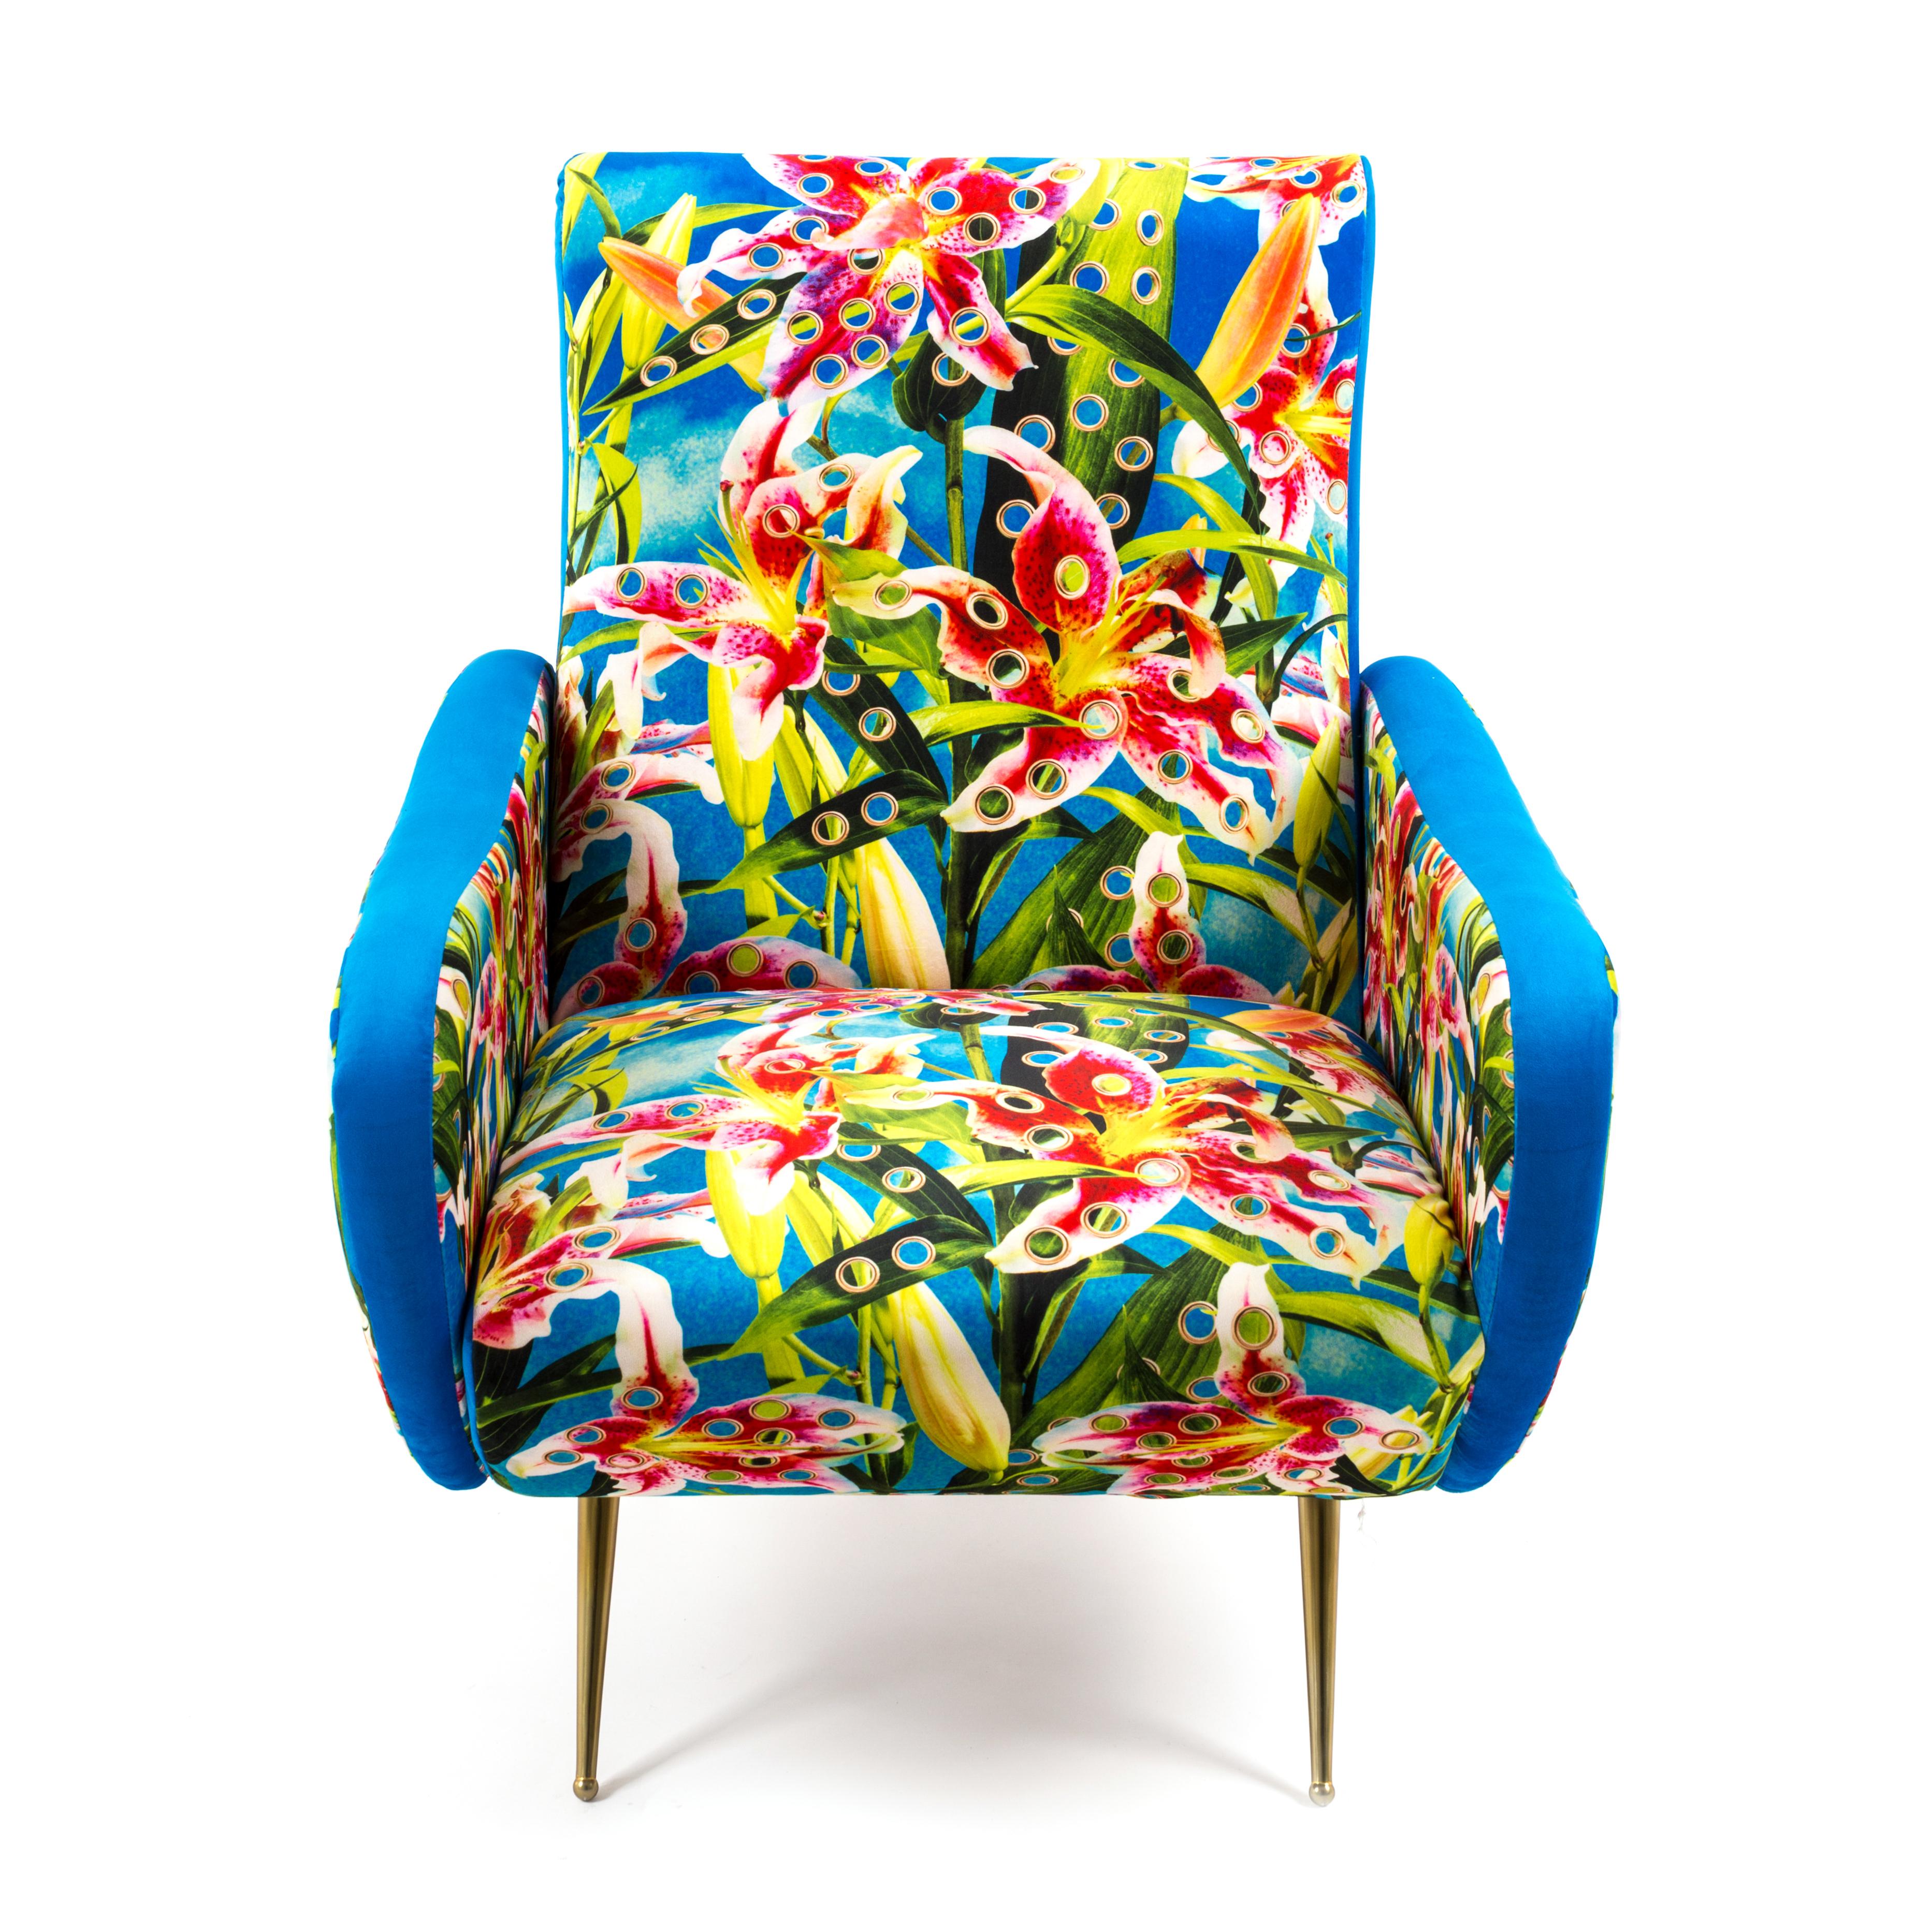 The Traditional Design of these 1950s style seats are upholstered with unexpected surreal images. The images of the Toiletpaper magazine invade furniture and become comfortable objects to relax in – not only for art lovers’ homes.

- Material: